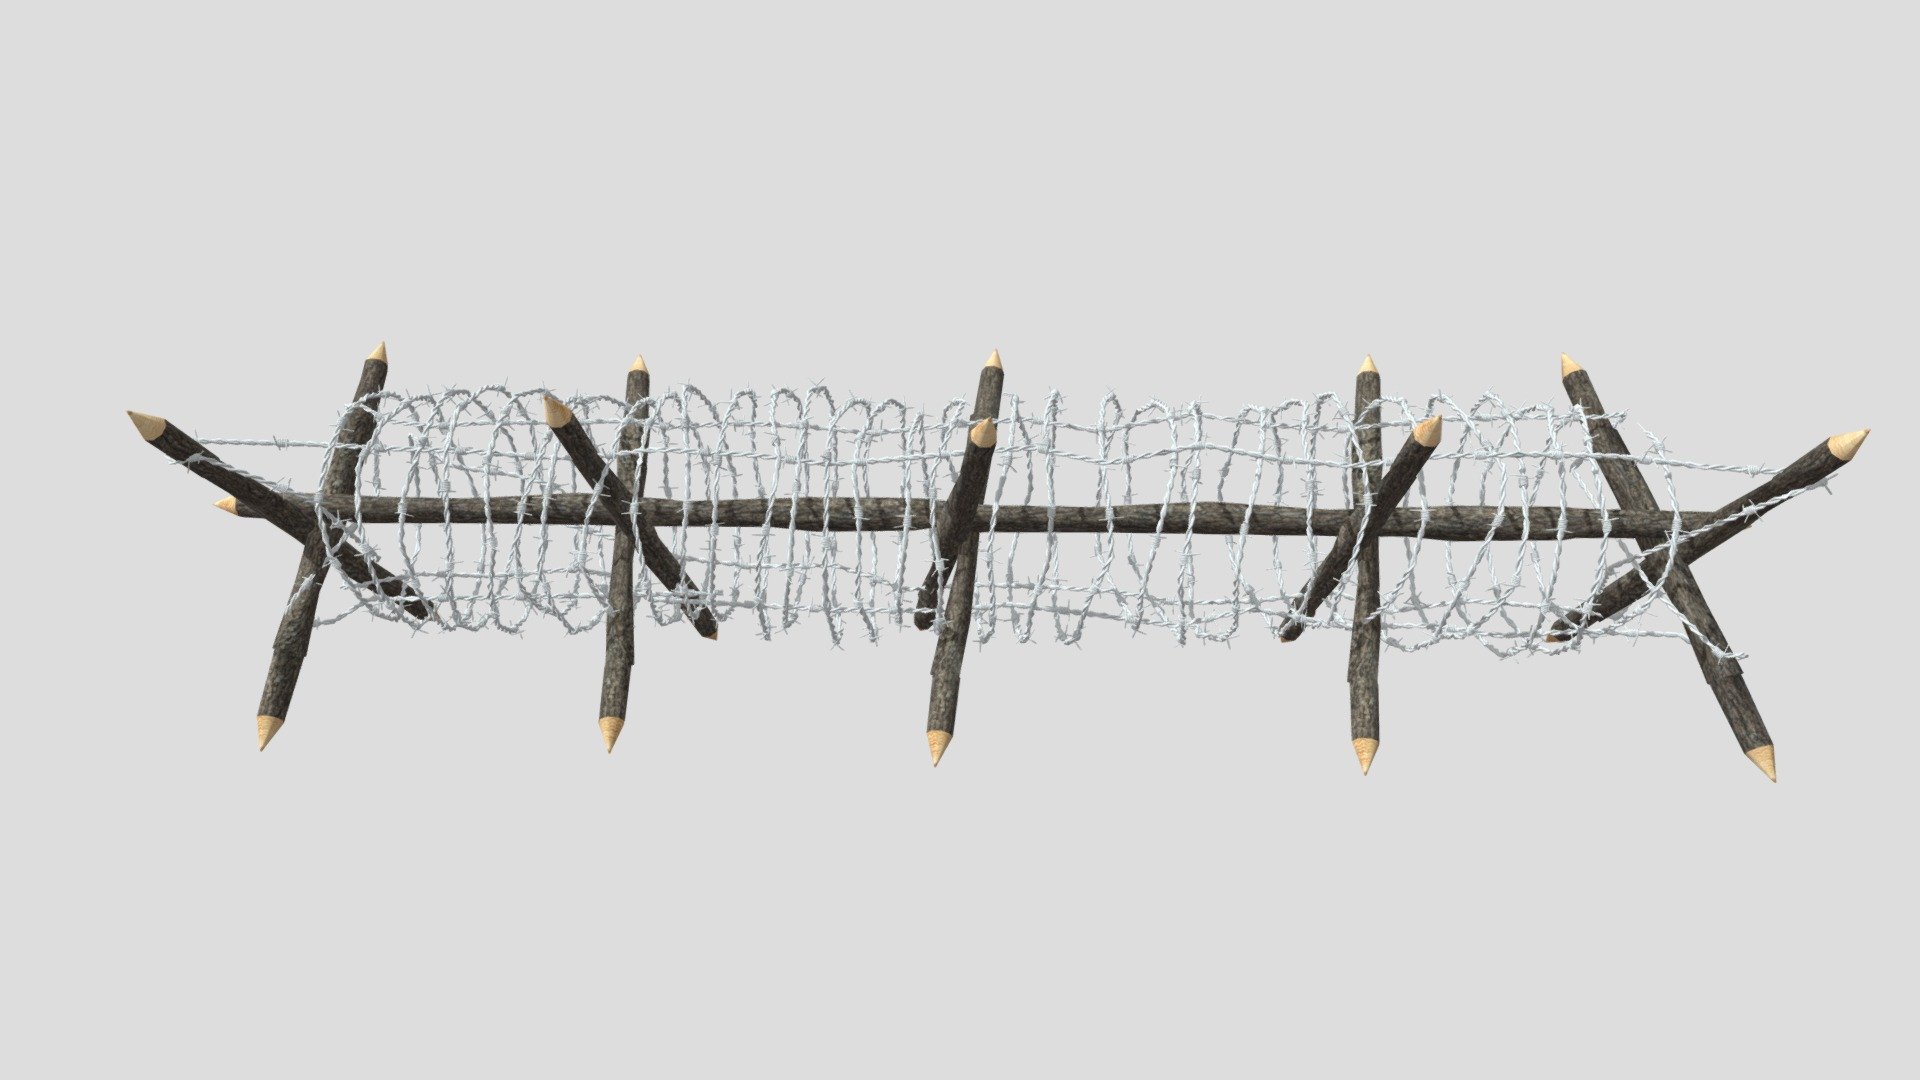 A very accurate model of a Barbed Wire Obstacle.

The model comes in five formats:
-.blend, rendered with cycles, as seen in the images;
-.obj, with materials applied and textures;
-.dae, with materials applied and textures;
-.fbx, with material slots applied;
-.stl;

Depending on the 3D Software program used, slight material tweaking might be needed.
This 3d model was originally created in Blender 2.78 and rendered with Cycles.
The model has materials applied in all formats, and are ready to import and render.
The model is built strictly out of quads and is subdivisable.

For any problems please feel free to contact me.

Don't forget to rate and enjoy! - Barb Wire Obstacle 11 - Buy Royalty Free 3D model by dragosburian 3d model